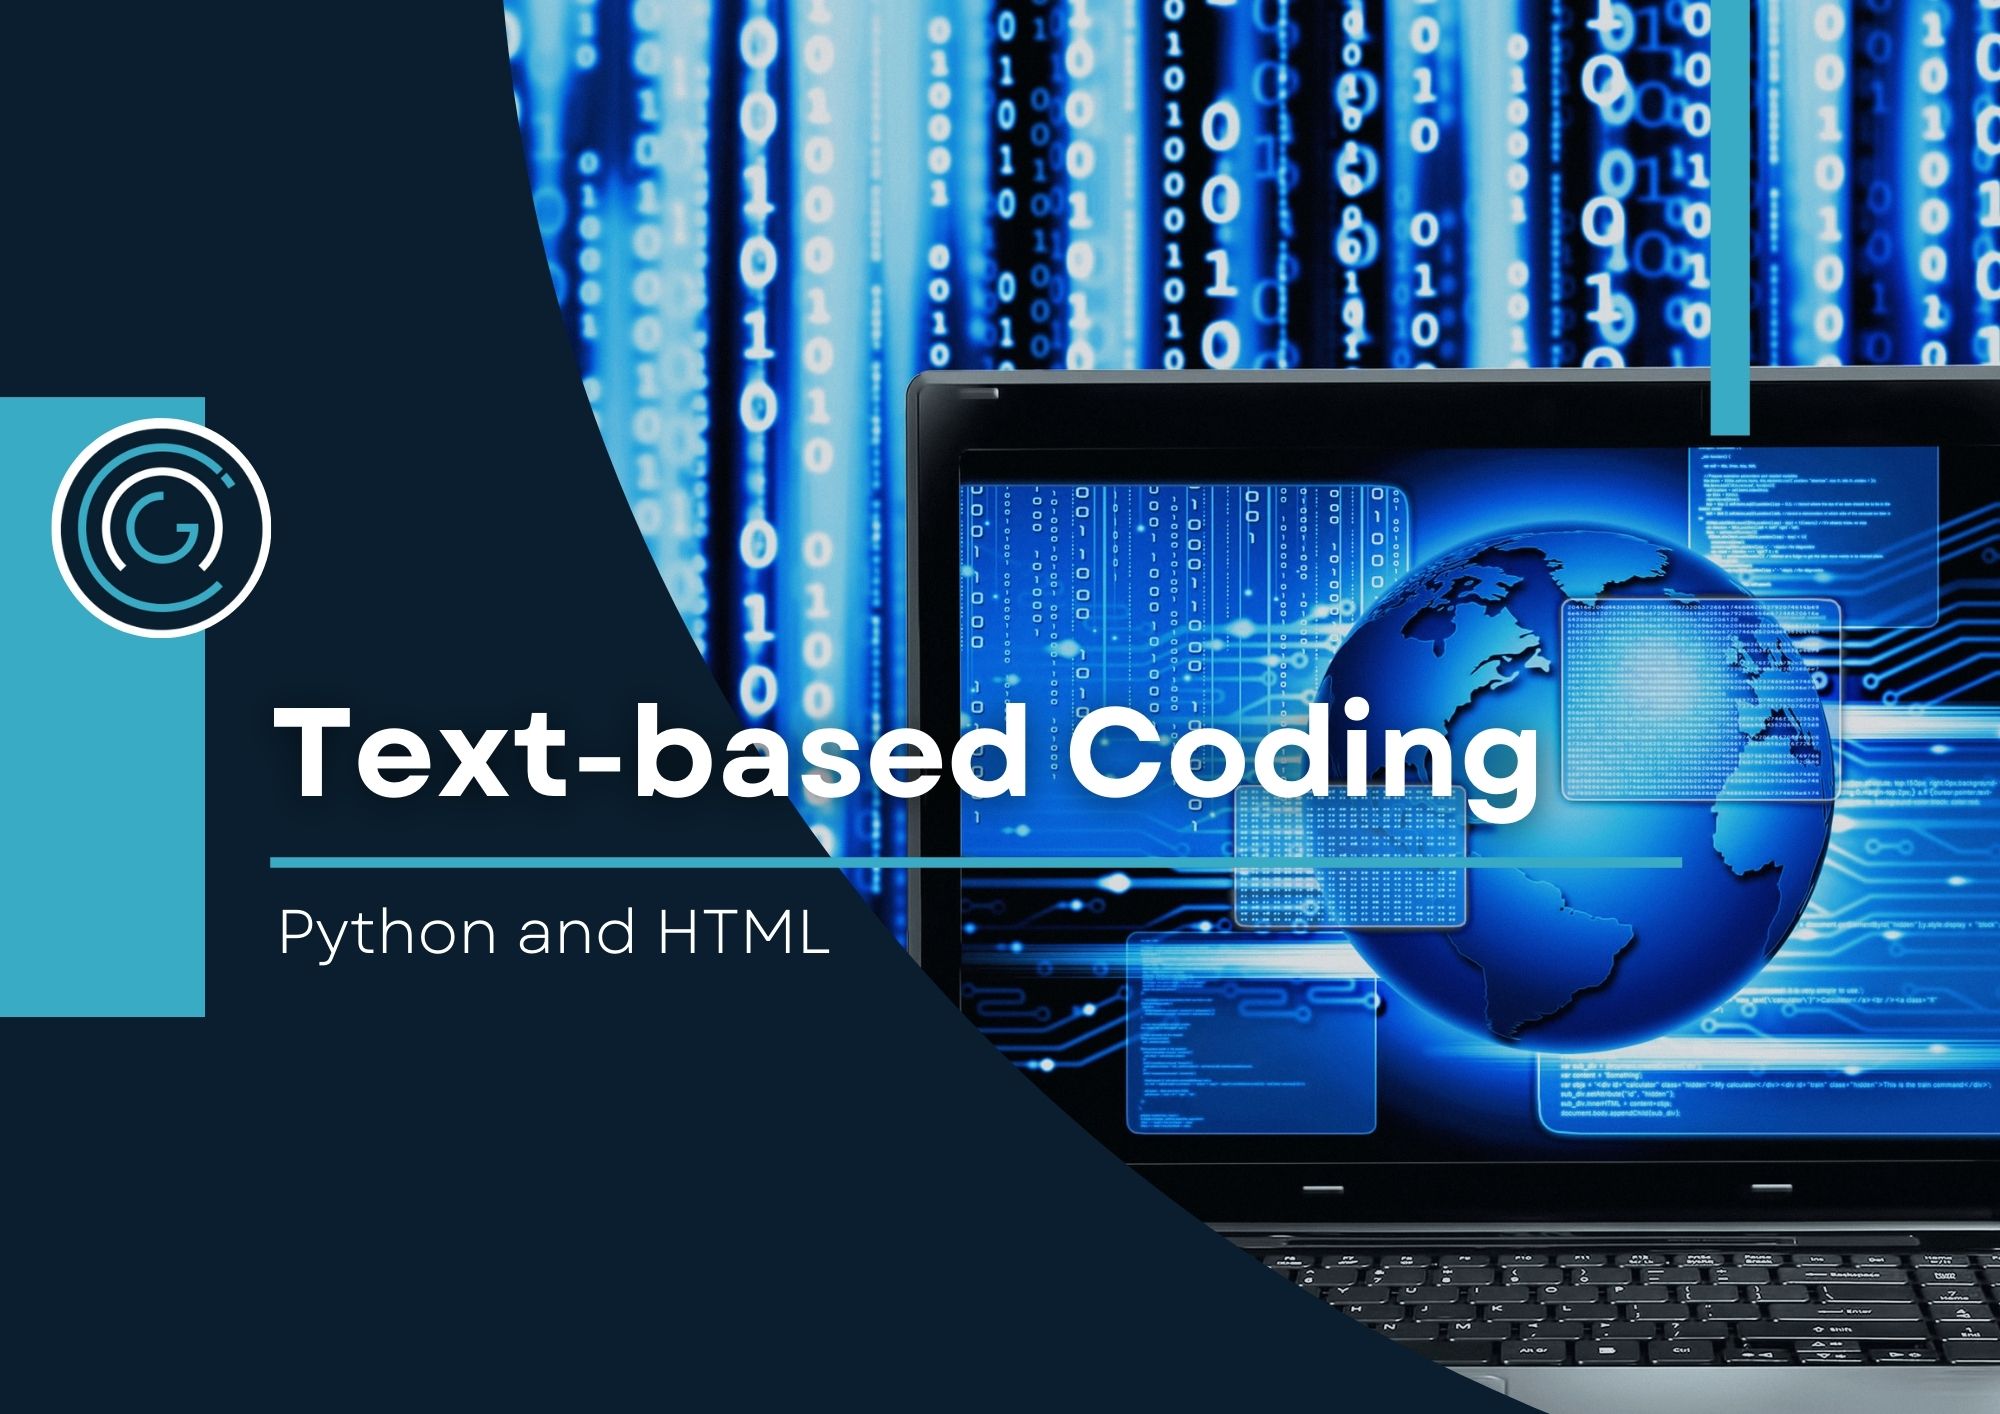 Text-based Coding